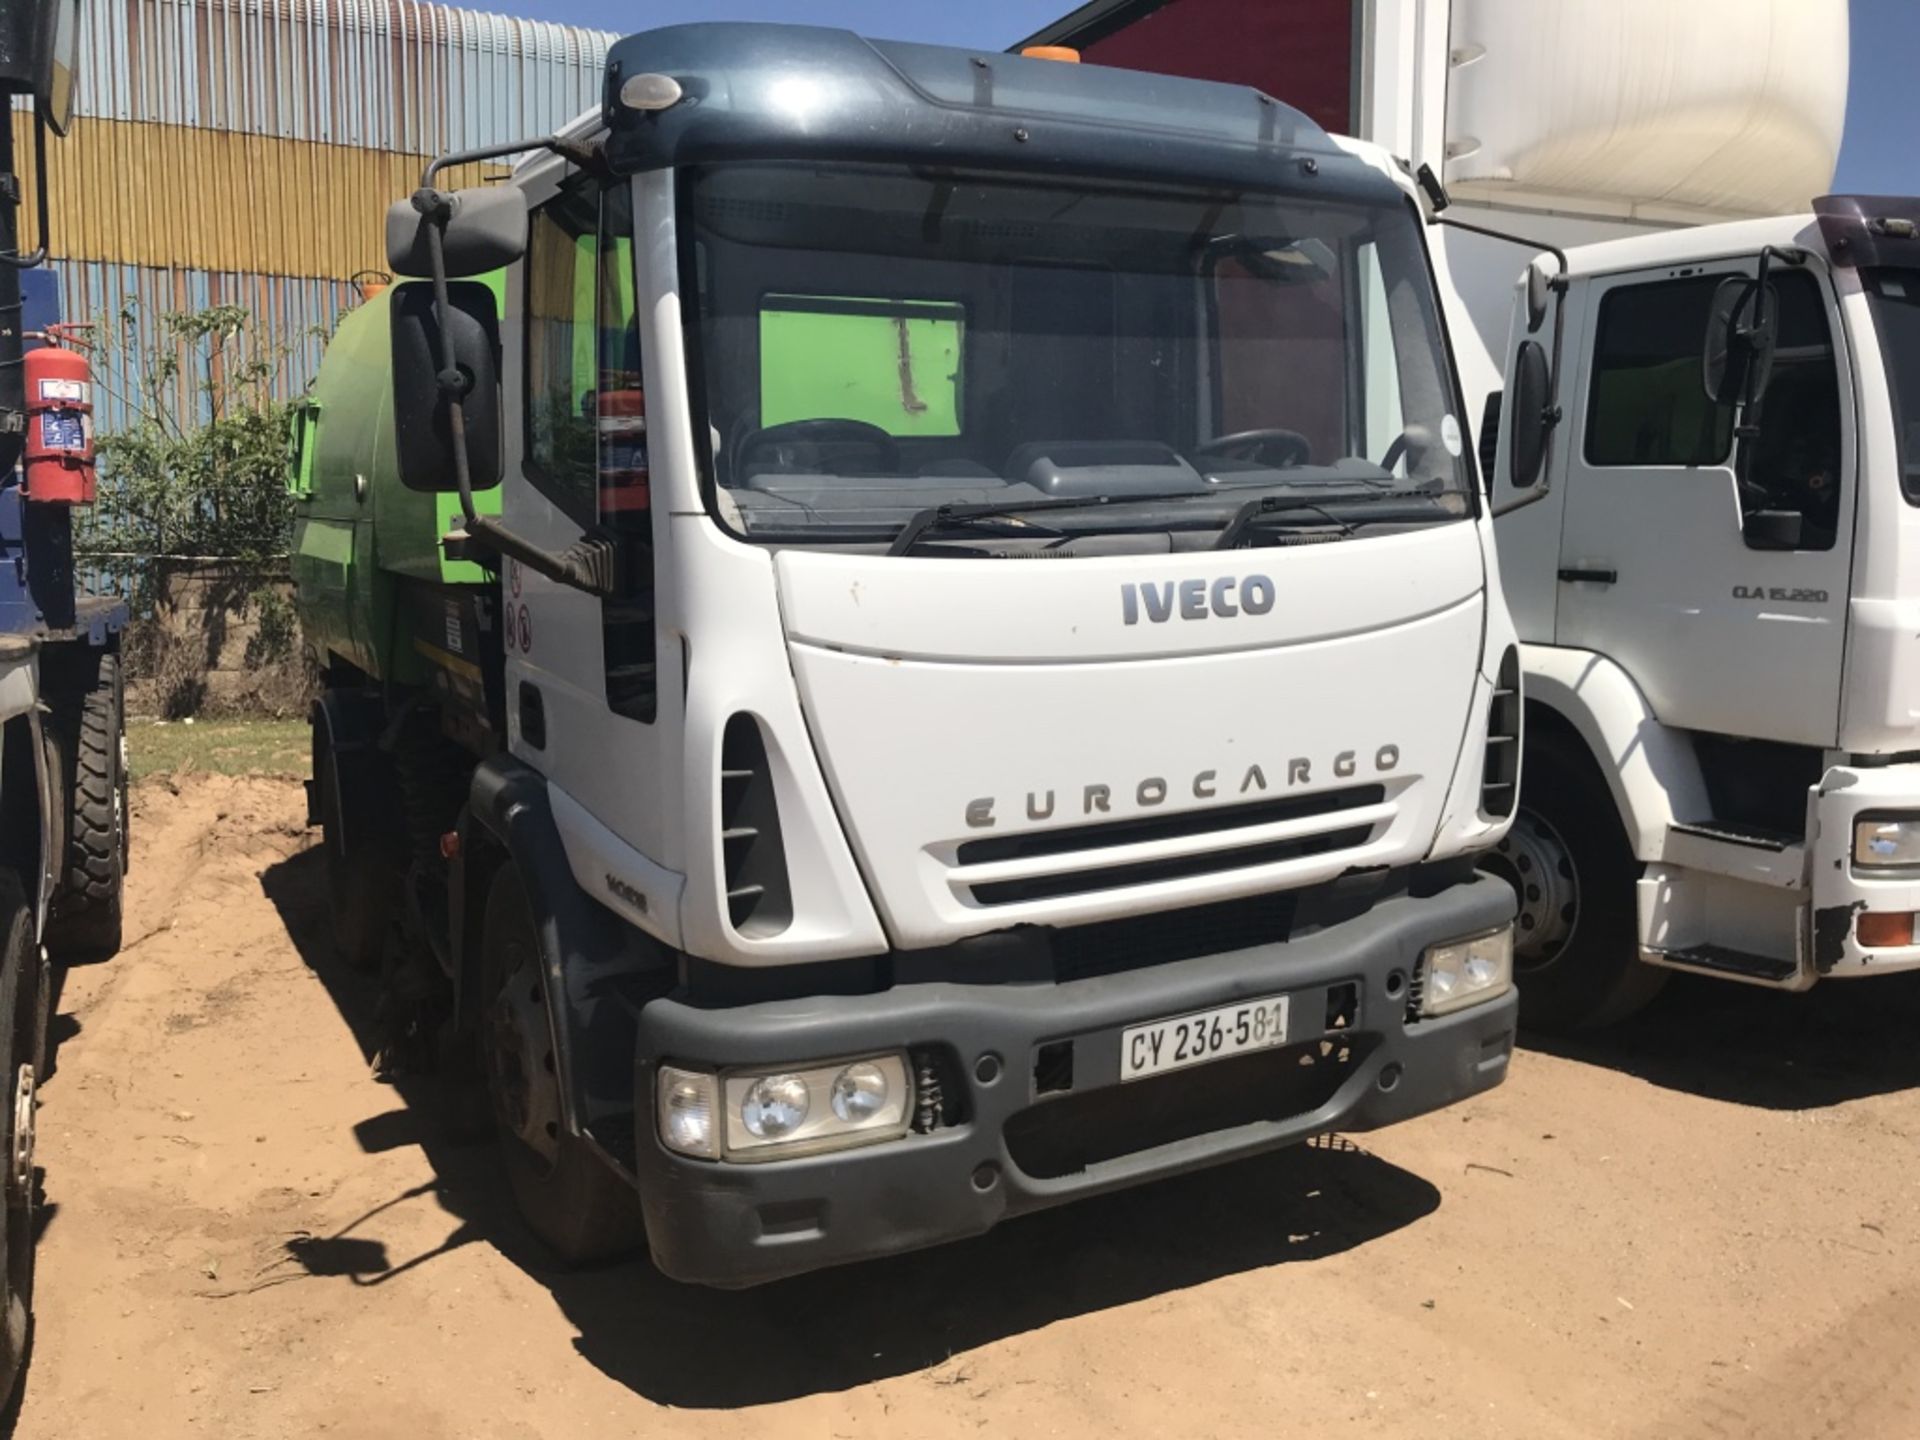 2007 IVECO 140E18 WITH JOHNSTON ROAD SWEEPER (SWEEPER NOT WORKING) - (CY236581)